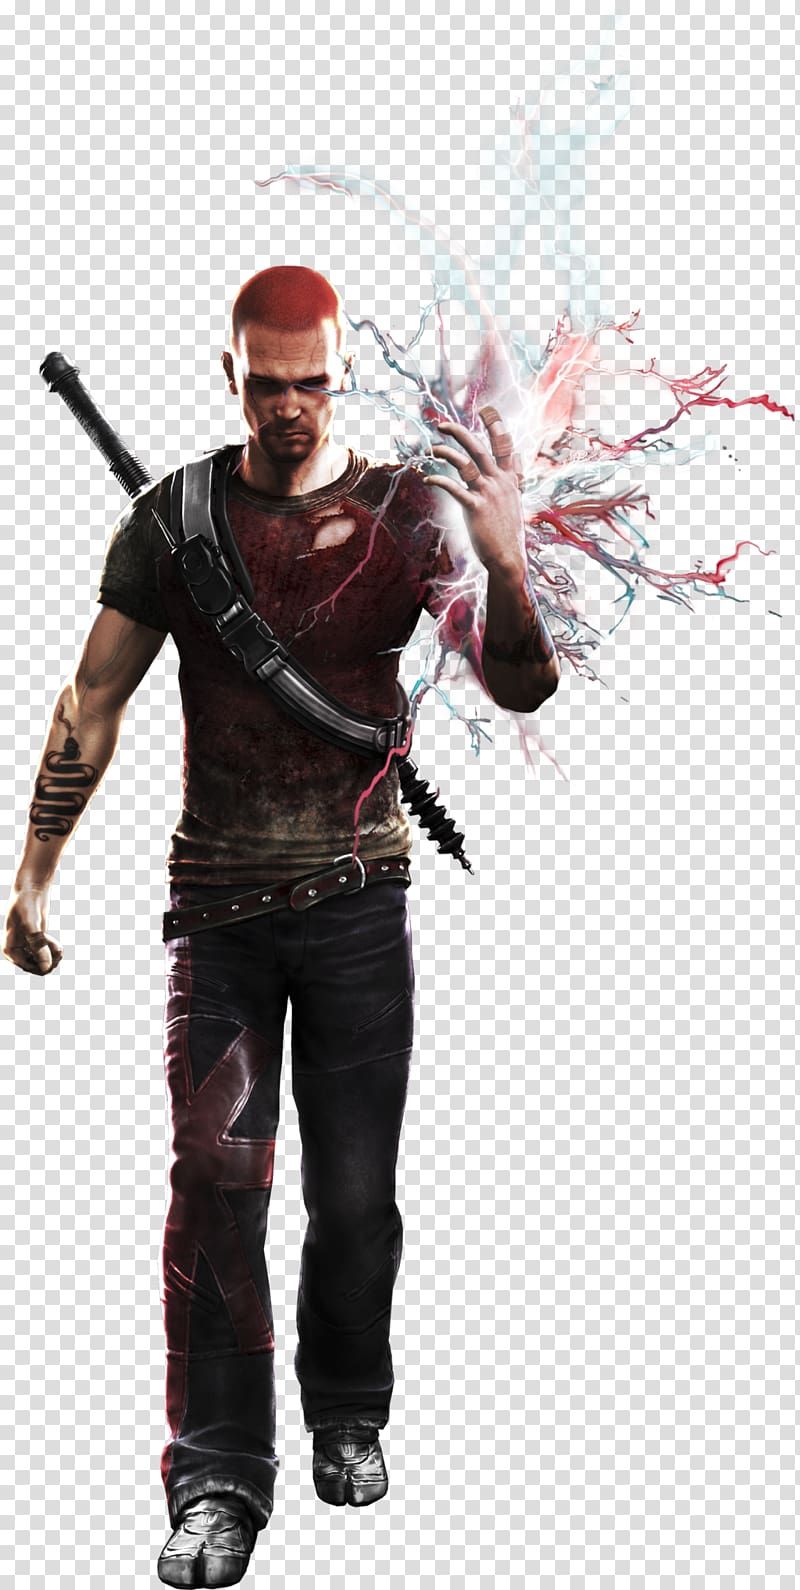 PlayStation All-Stars Battle Royale PlayStation 3 Infamous 2 Infamous Second Son Cole MacGrath, son transparent background PNG clipart